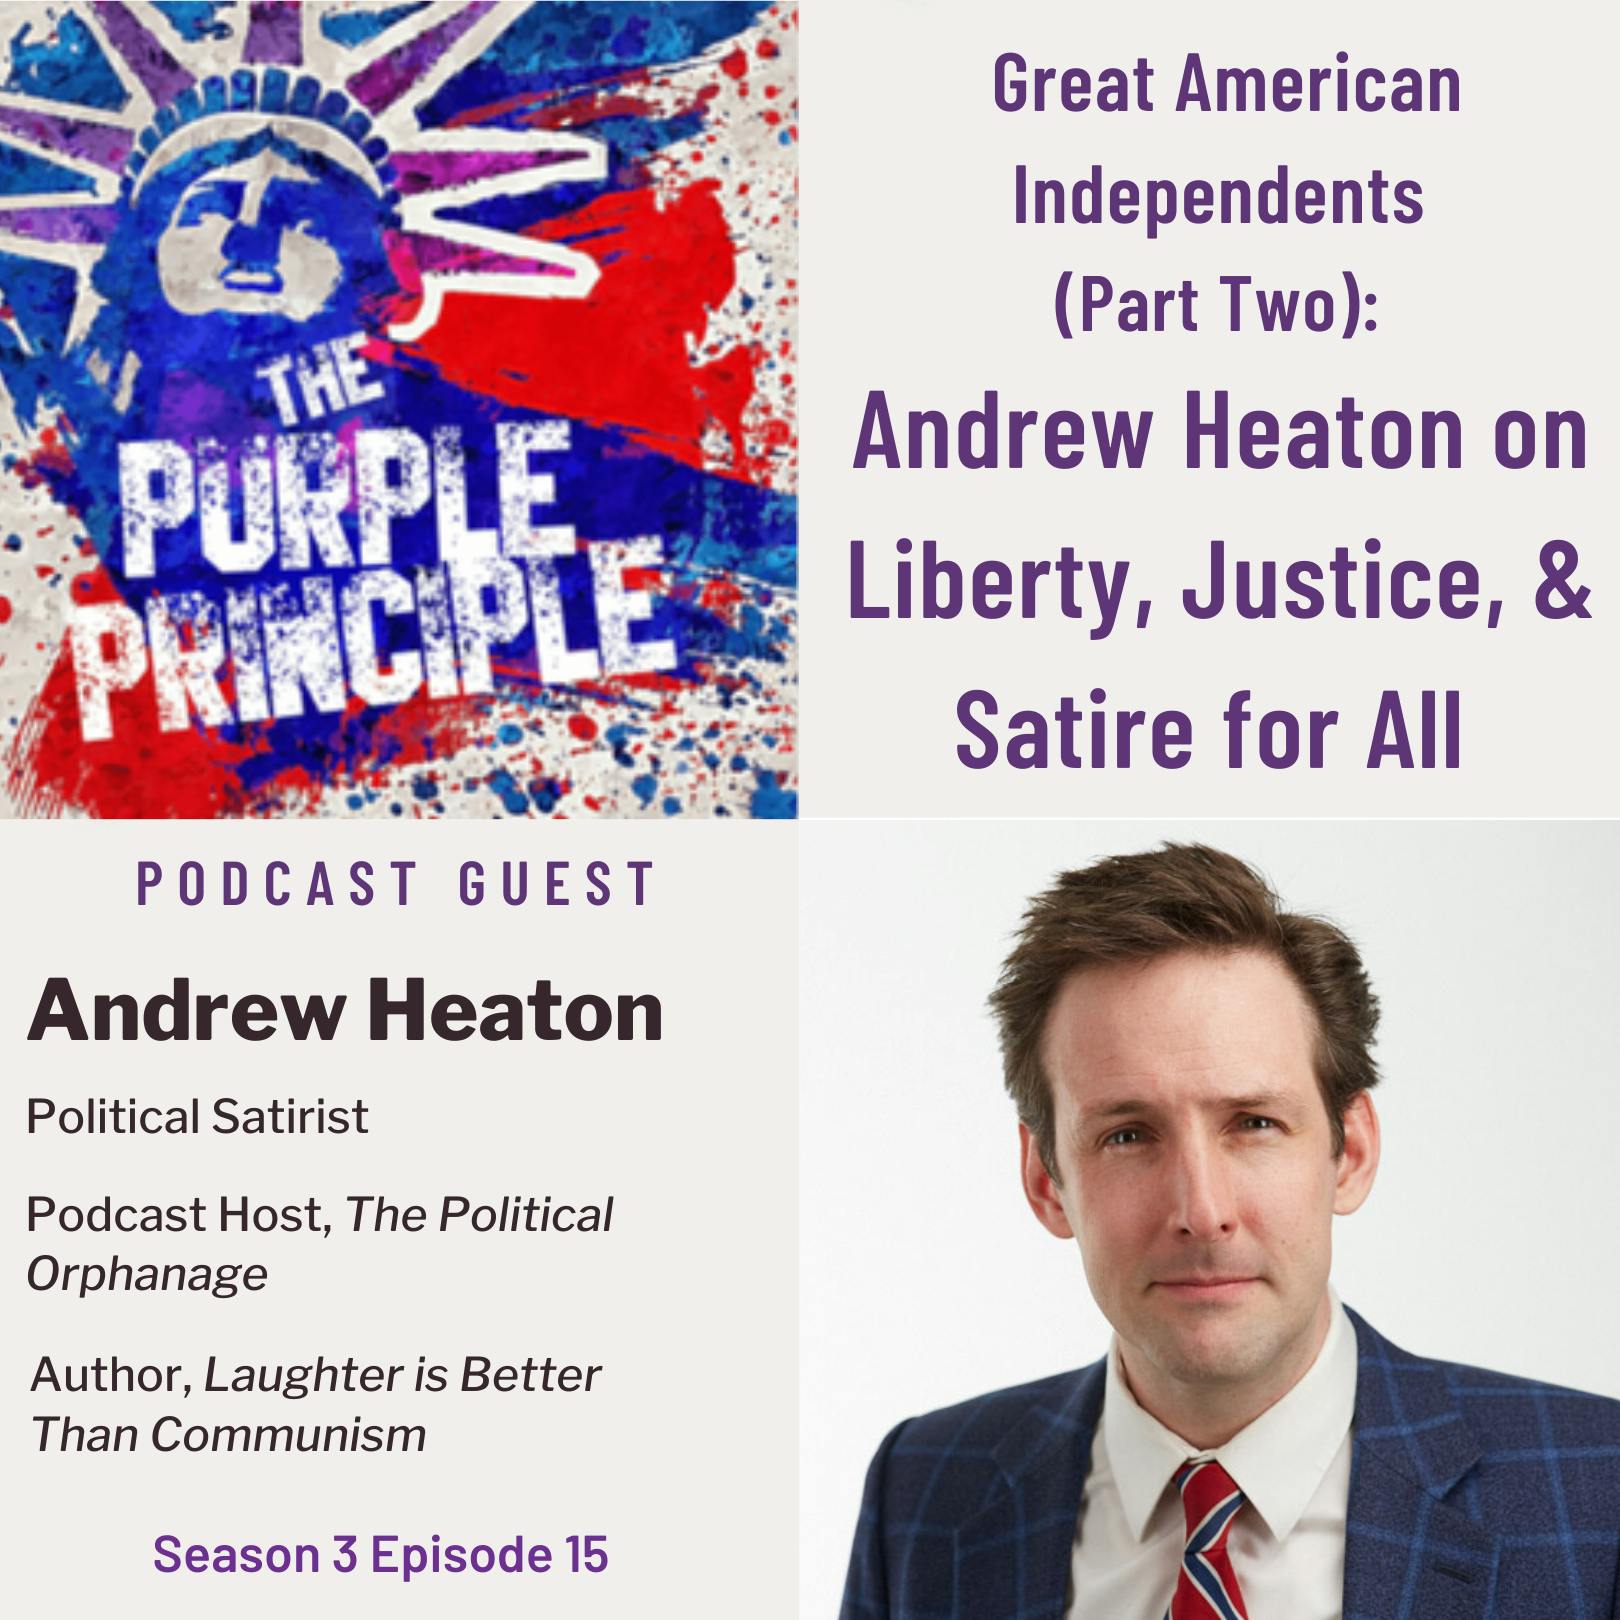 Great American Independents (Part Two): Andrew Heaton on Liberty, Justice & Satire for All